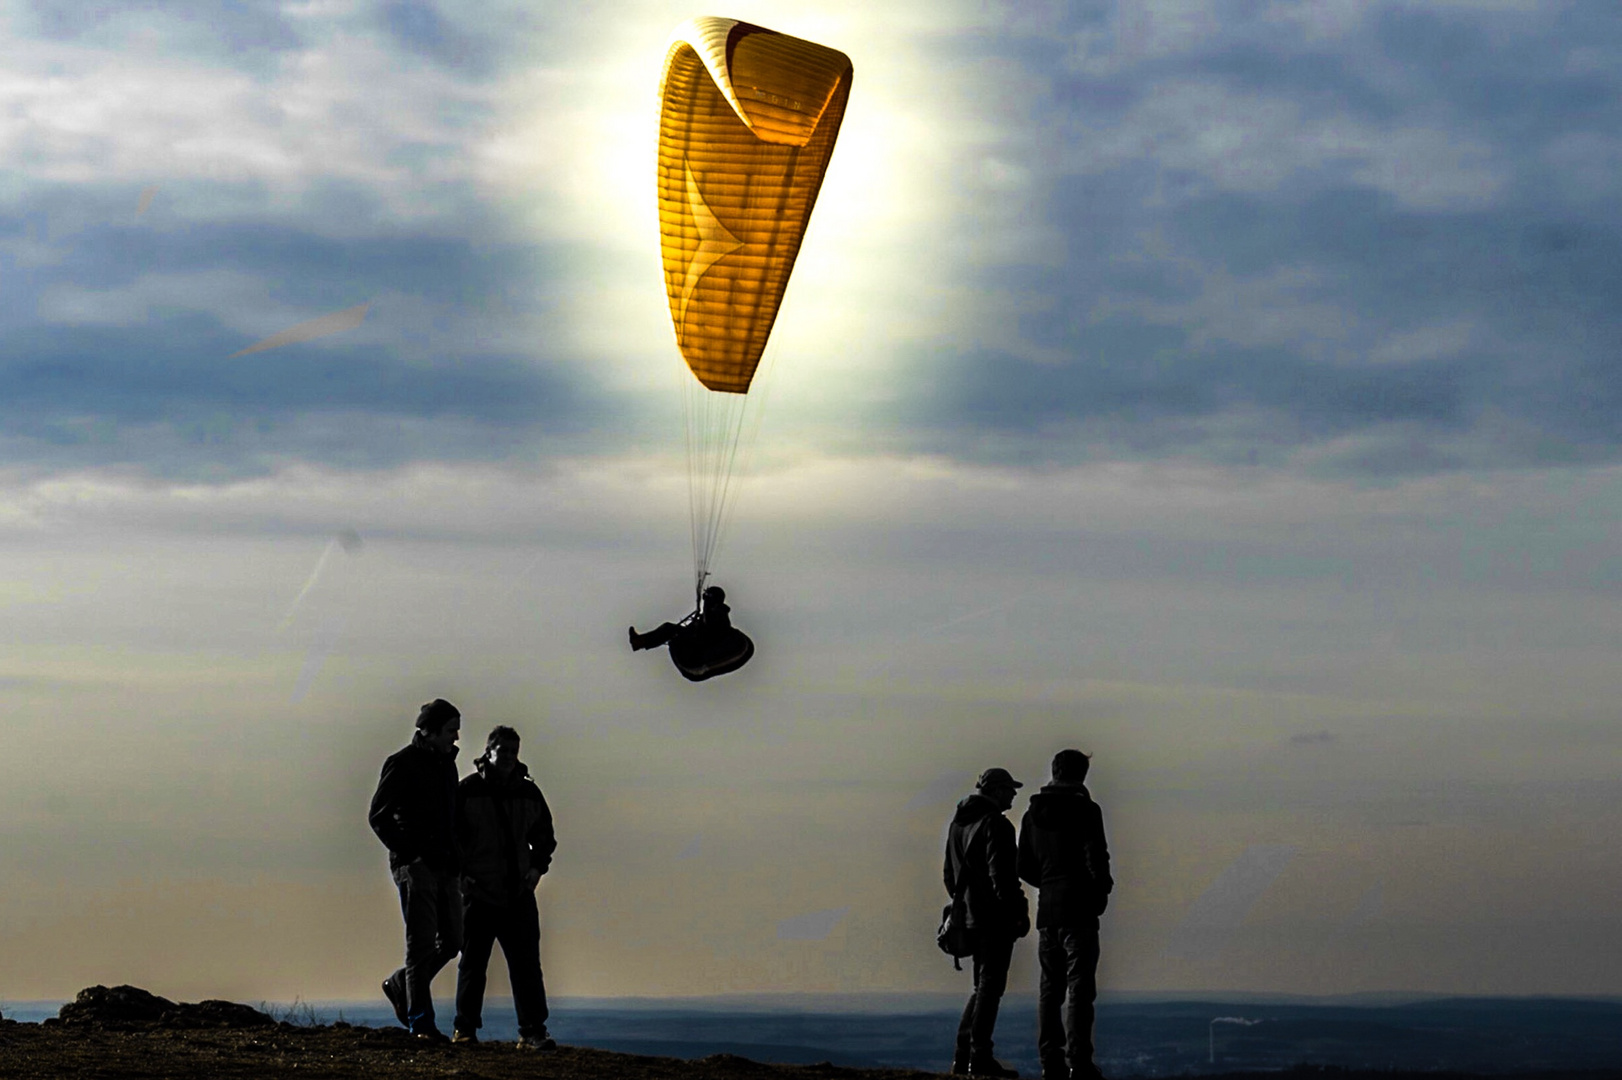 Paragliding in the evening